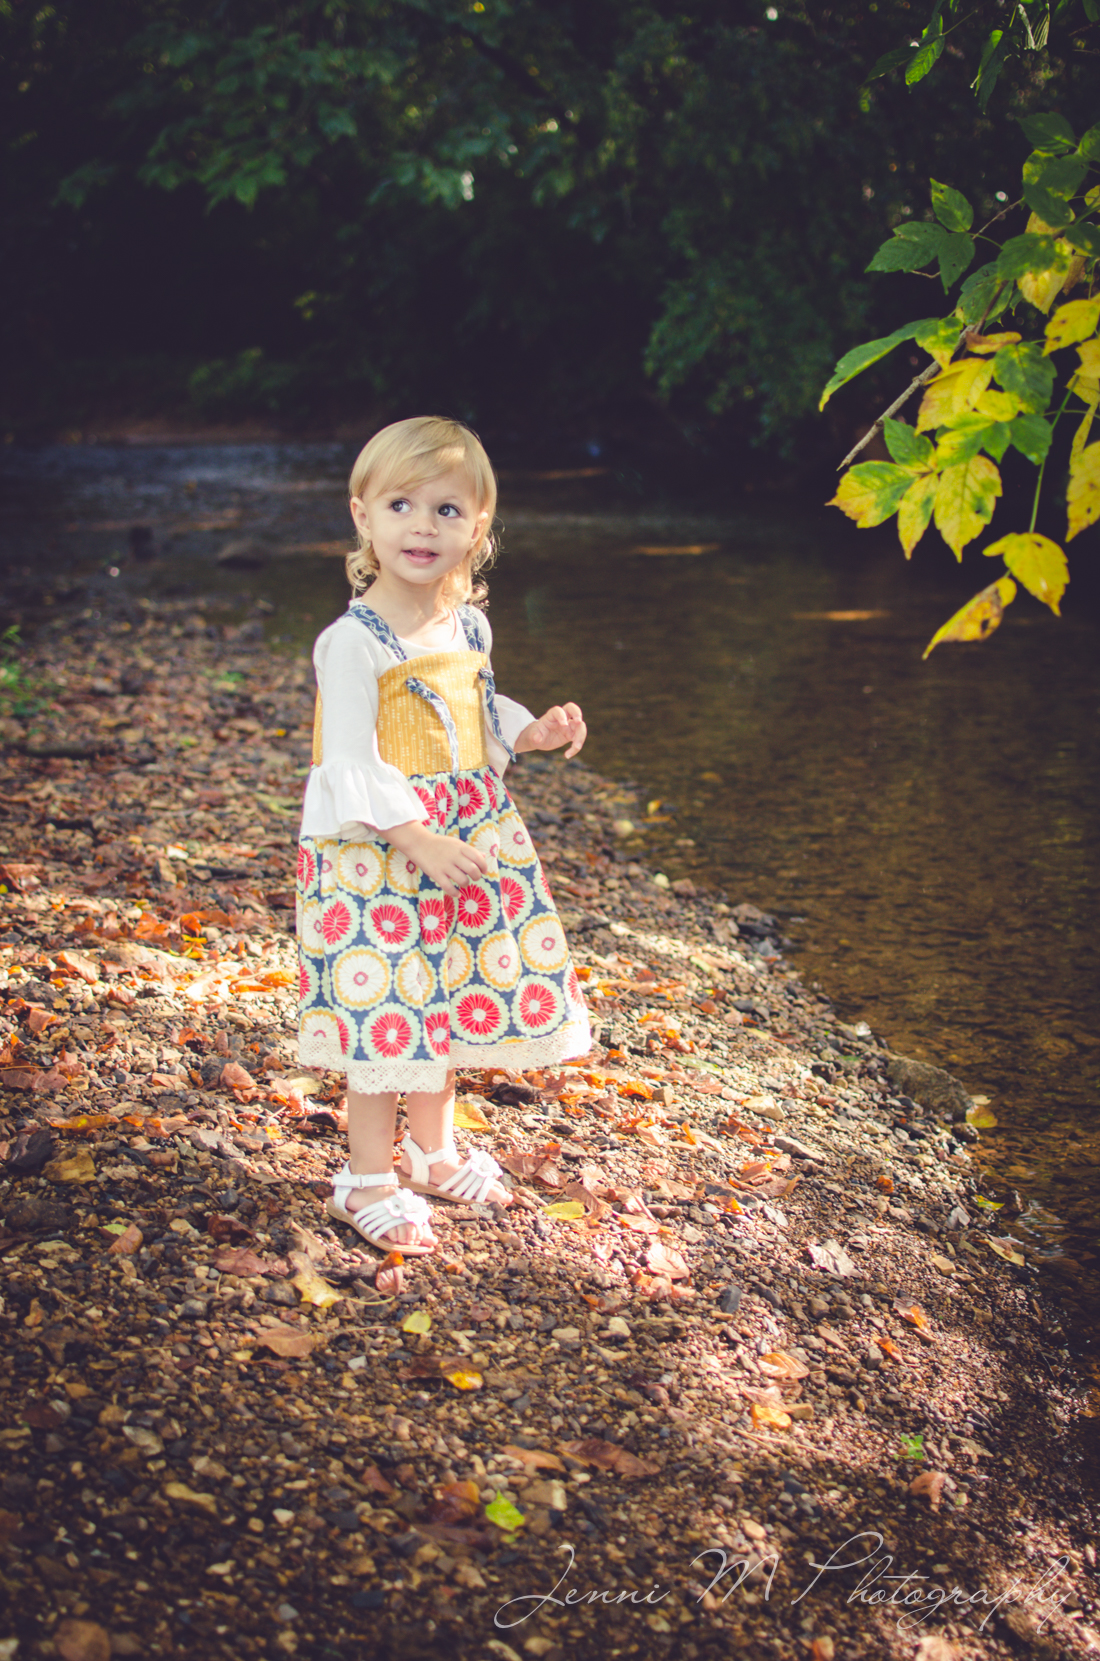 Jenni M Photography 2 year old birthday photography outdoor affordable natural-5